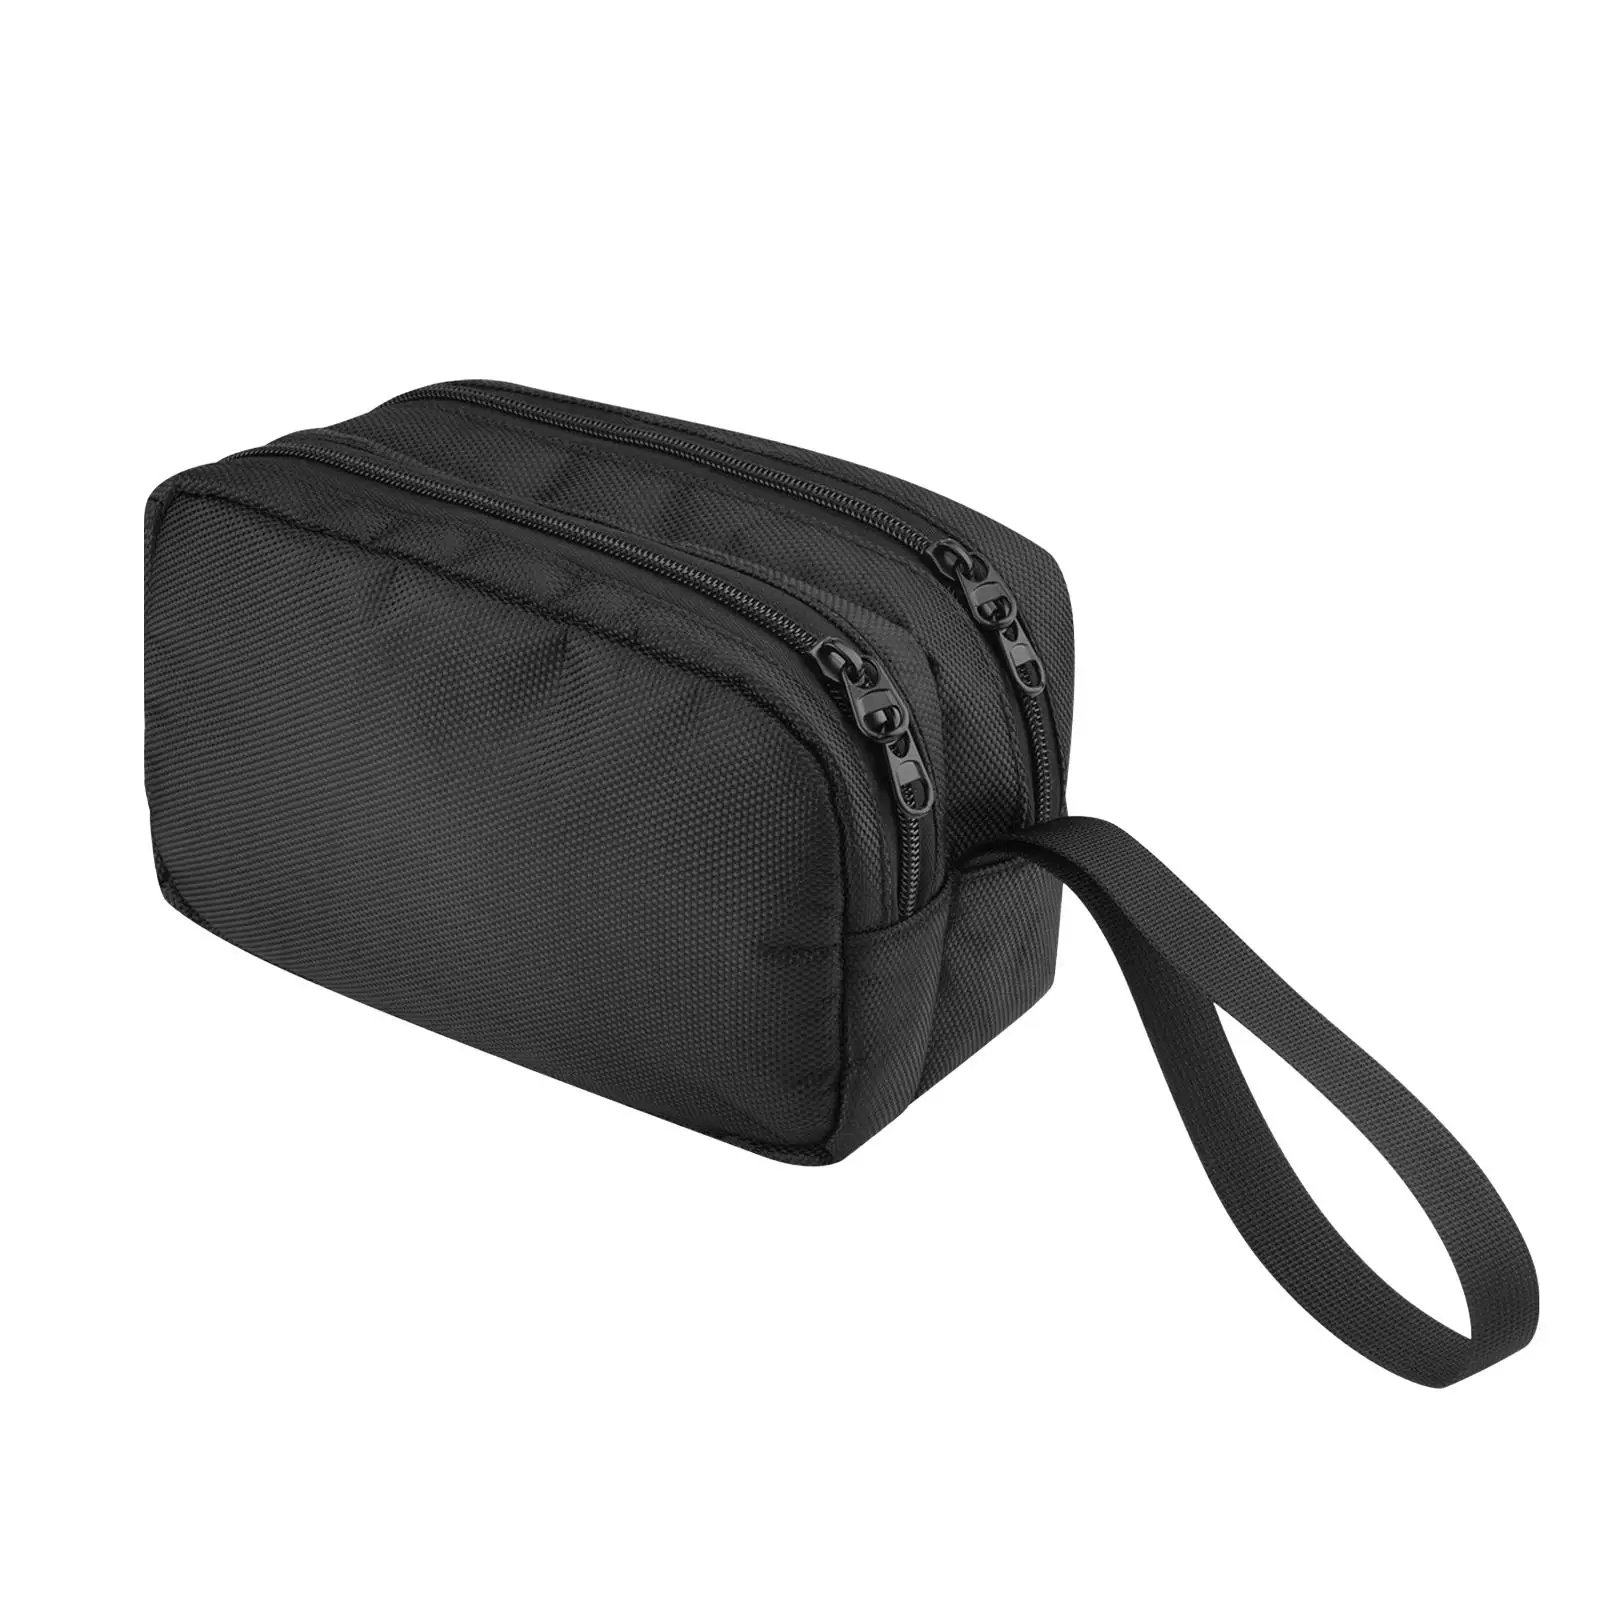 Black Carrying Case Multifunction Bag Wear Resistant Travel Cable Organizer Bag